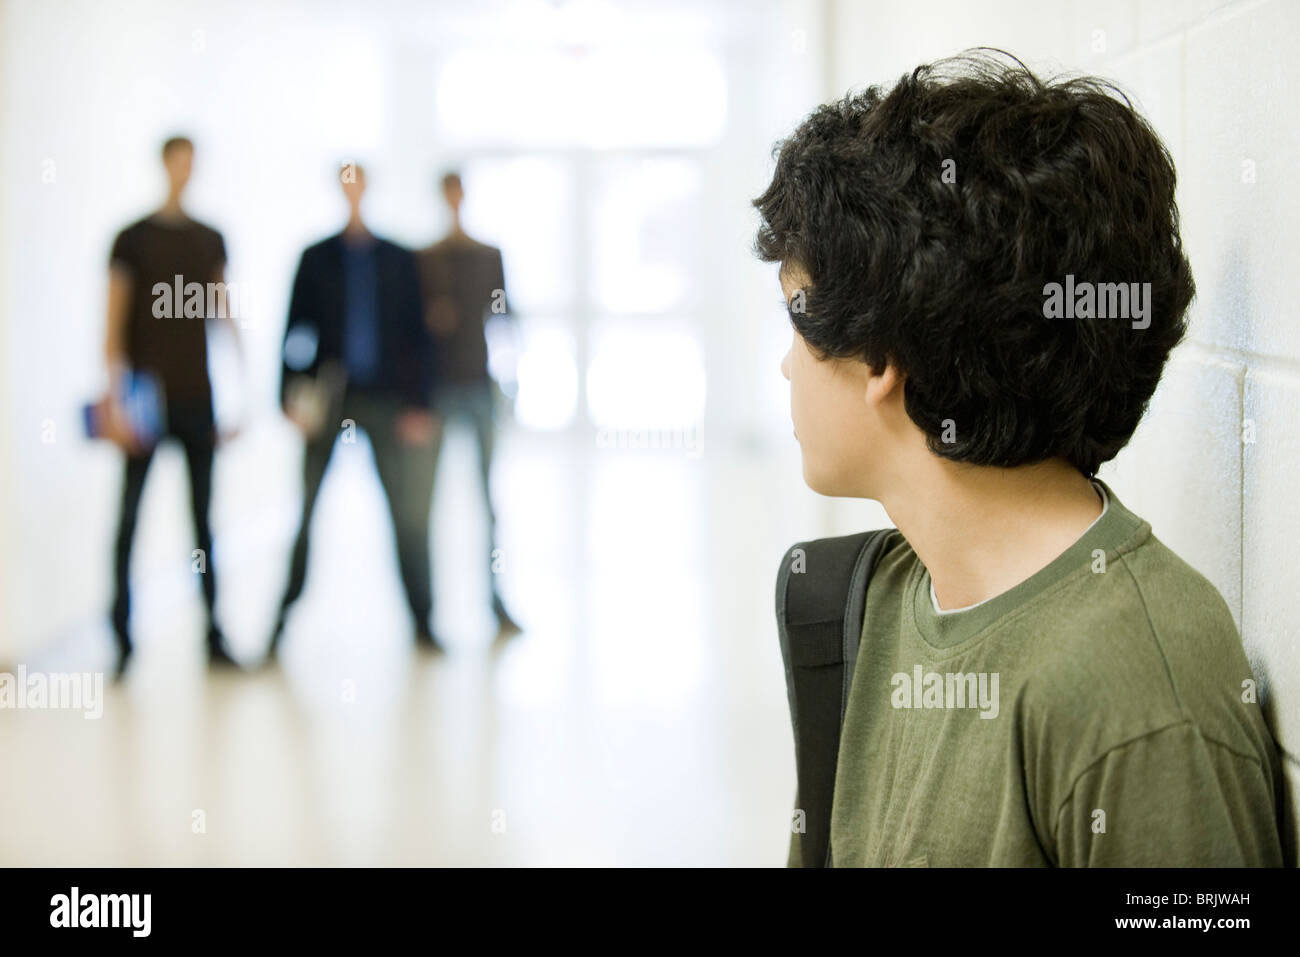 Teenage boy looking over shoulder at bullies in background Stock Photo